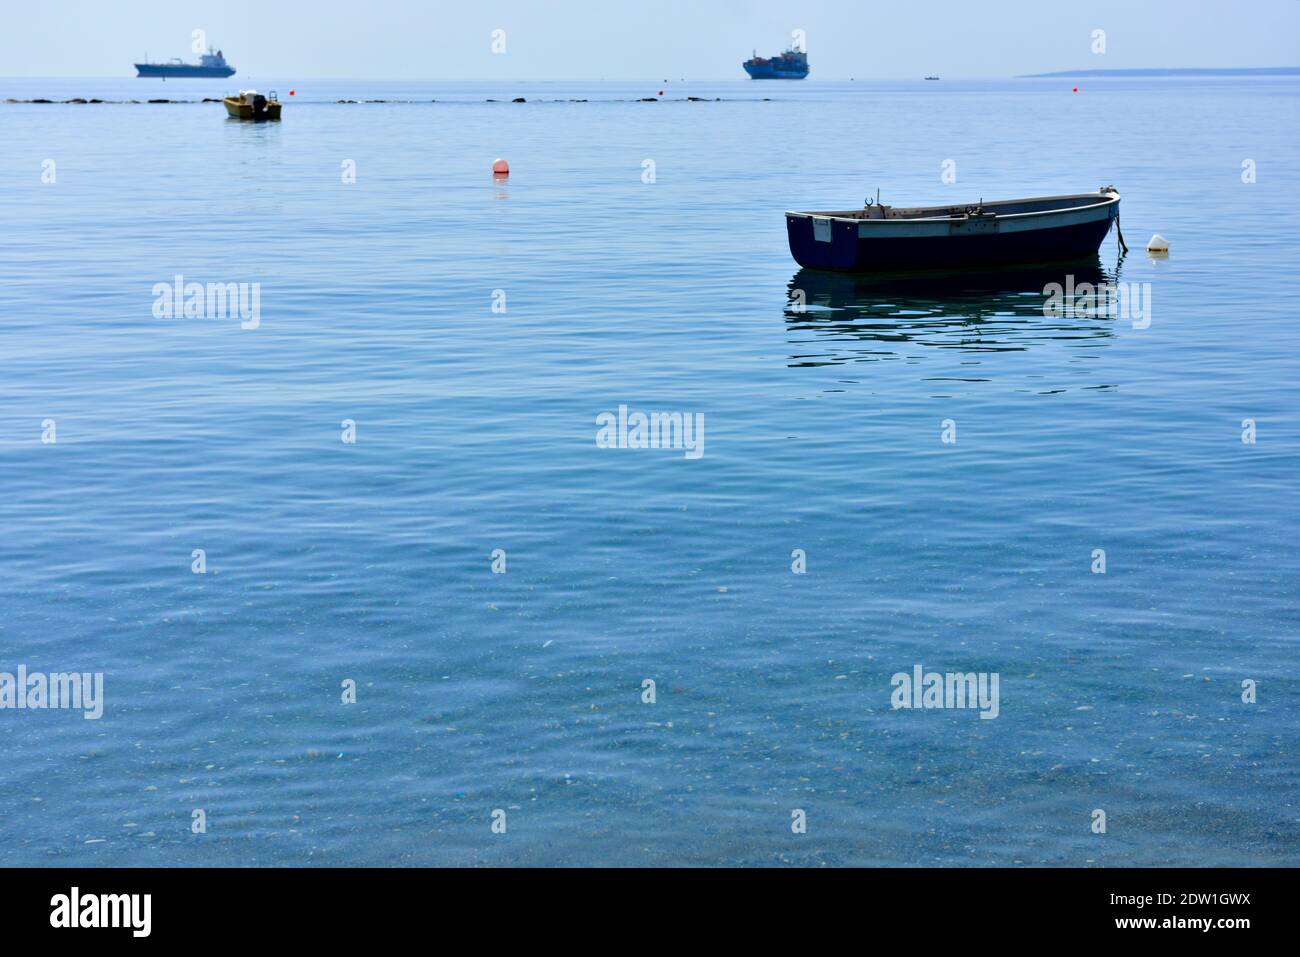 Mediterranean sea, calm water, with breakwater, boats and ships off Limassol, Cyprus Stock Photo